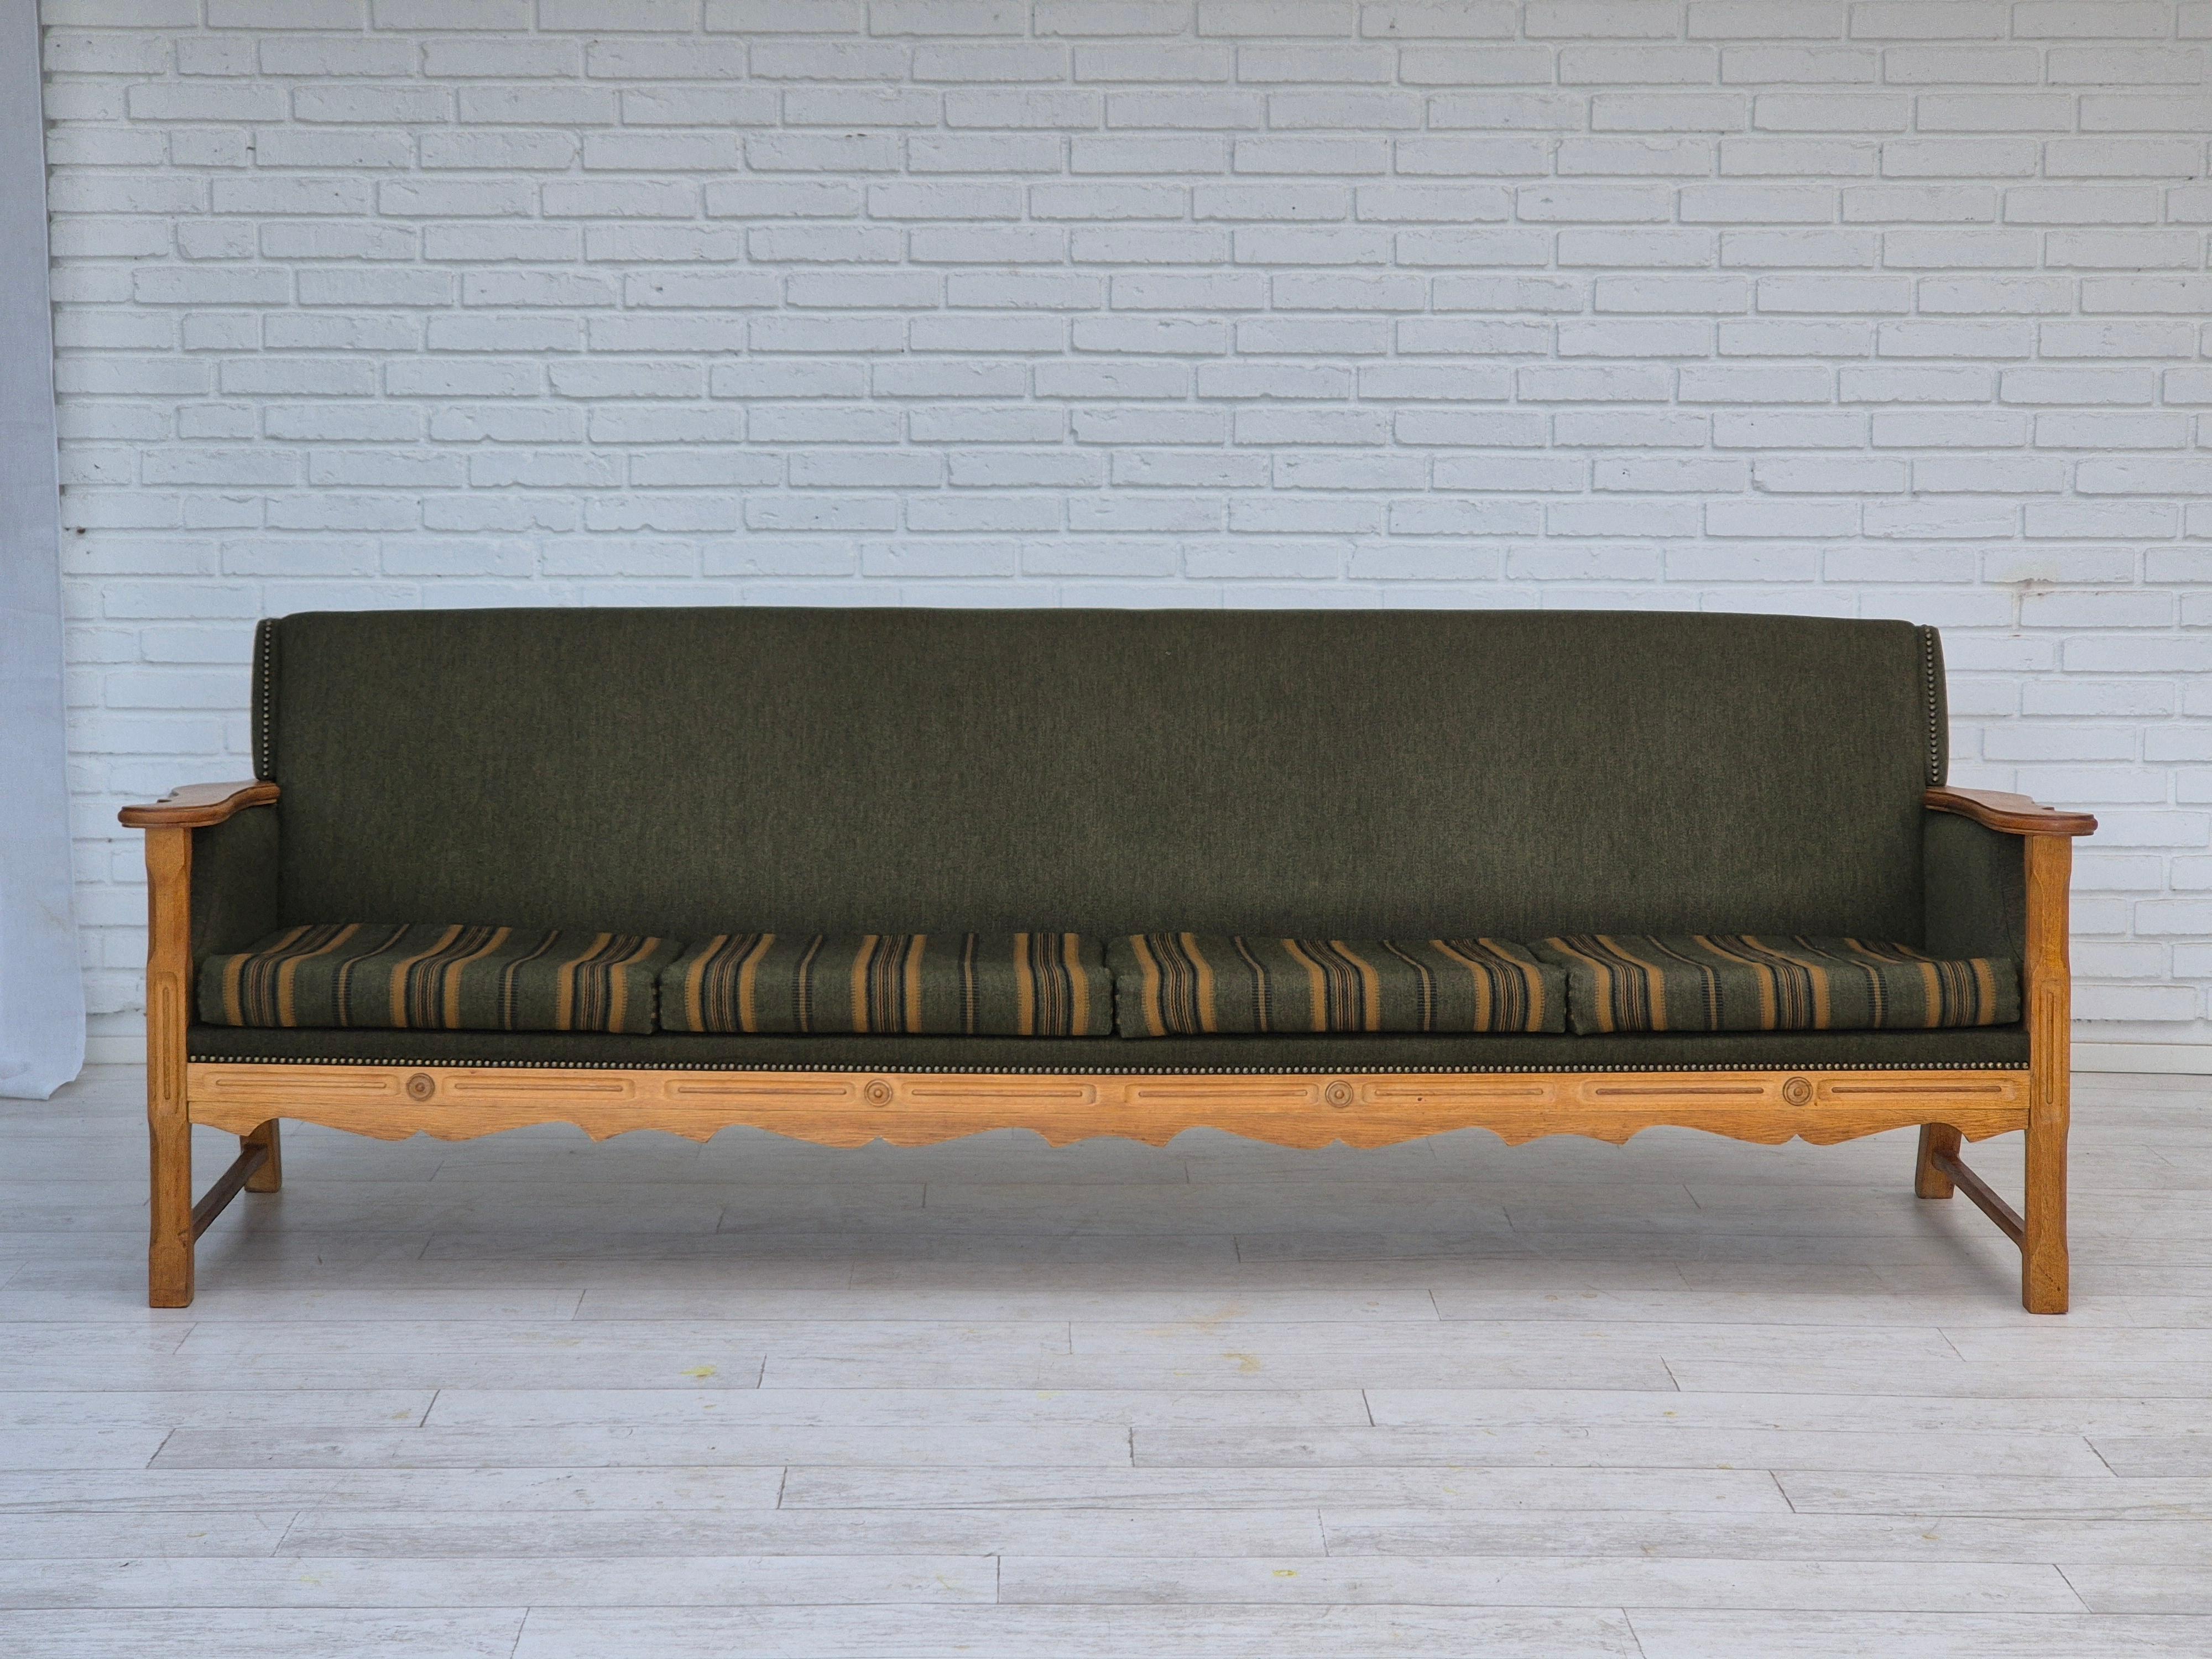 1970s, Danish 4 seater sofa in original very good condition: no smells and no stains. Furniture green wool fabric, new furniture foam in seat cushions. Oak wood. Manufactured by Danish furniture manufacturer in about 1970-75s.